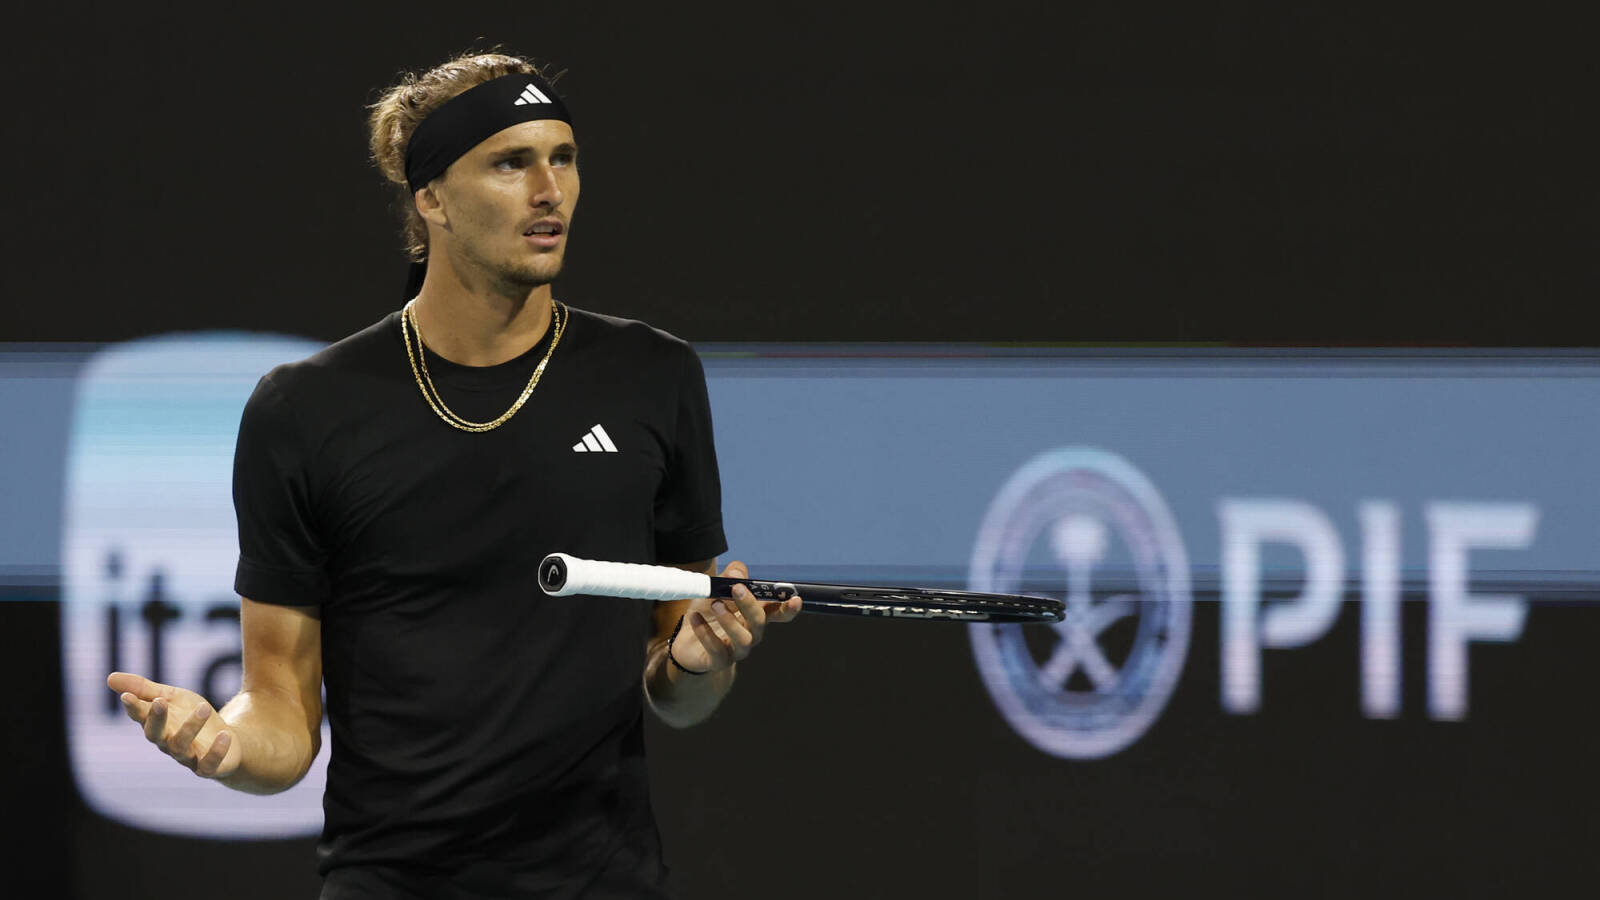 Alexander Zverev feels ‘comfortable in Rome’ after Rafael Nadal and Novak Djokovic get knocked out of the tournament